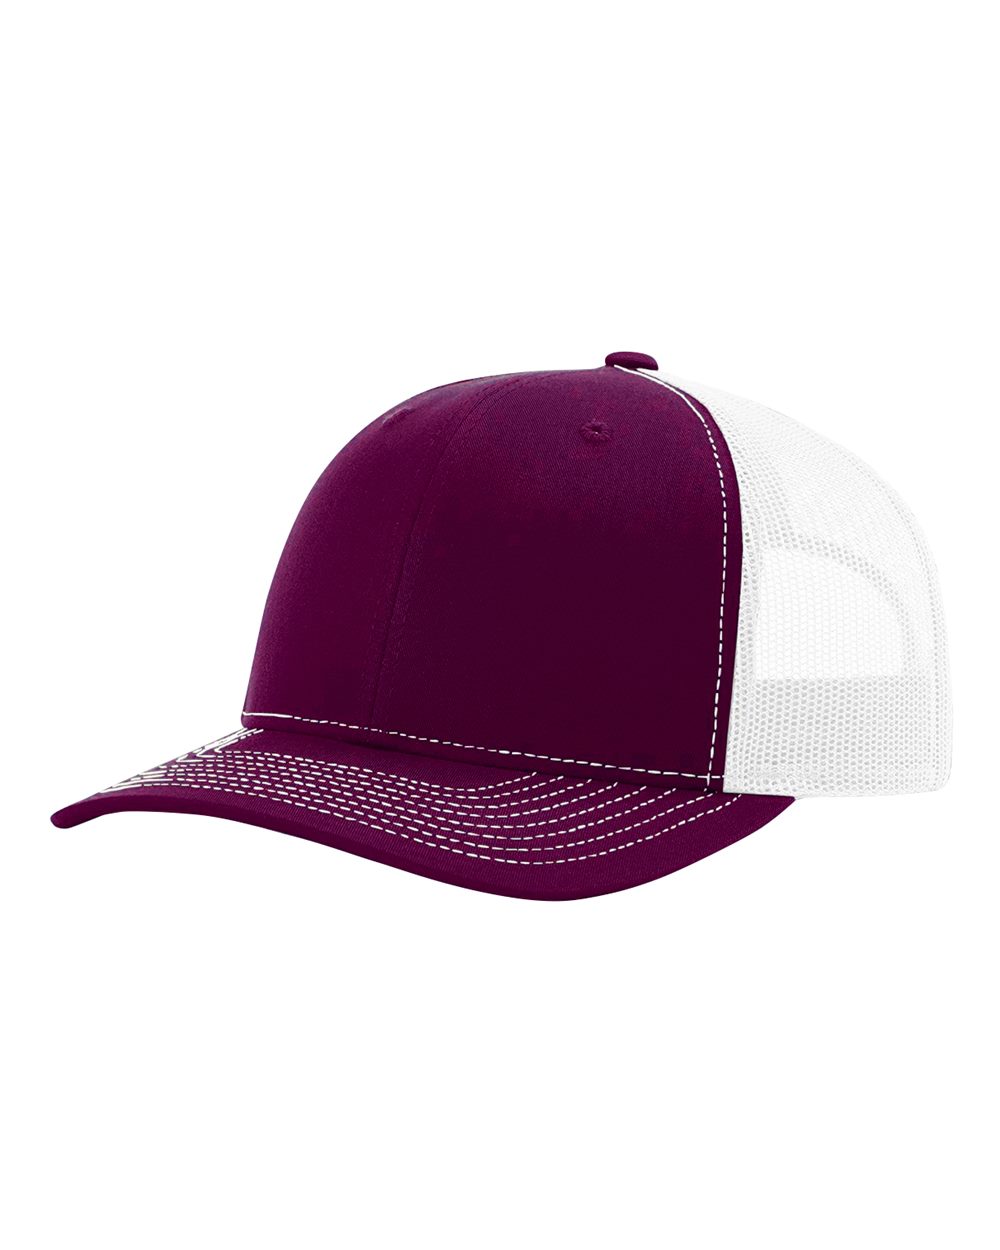 click to view Maroon/ White